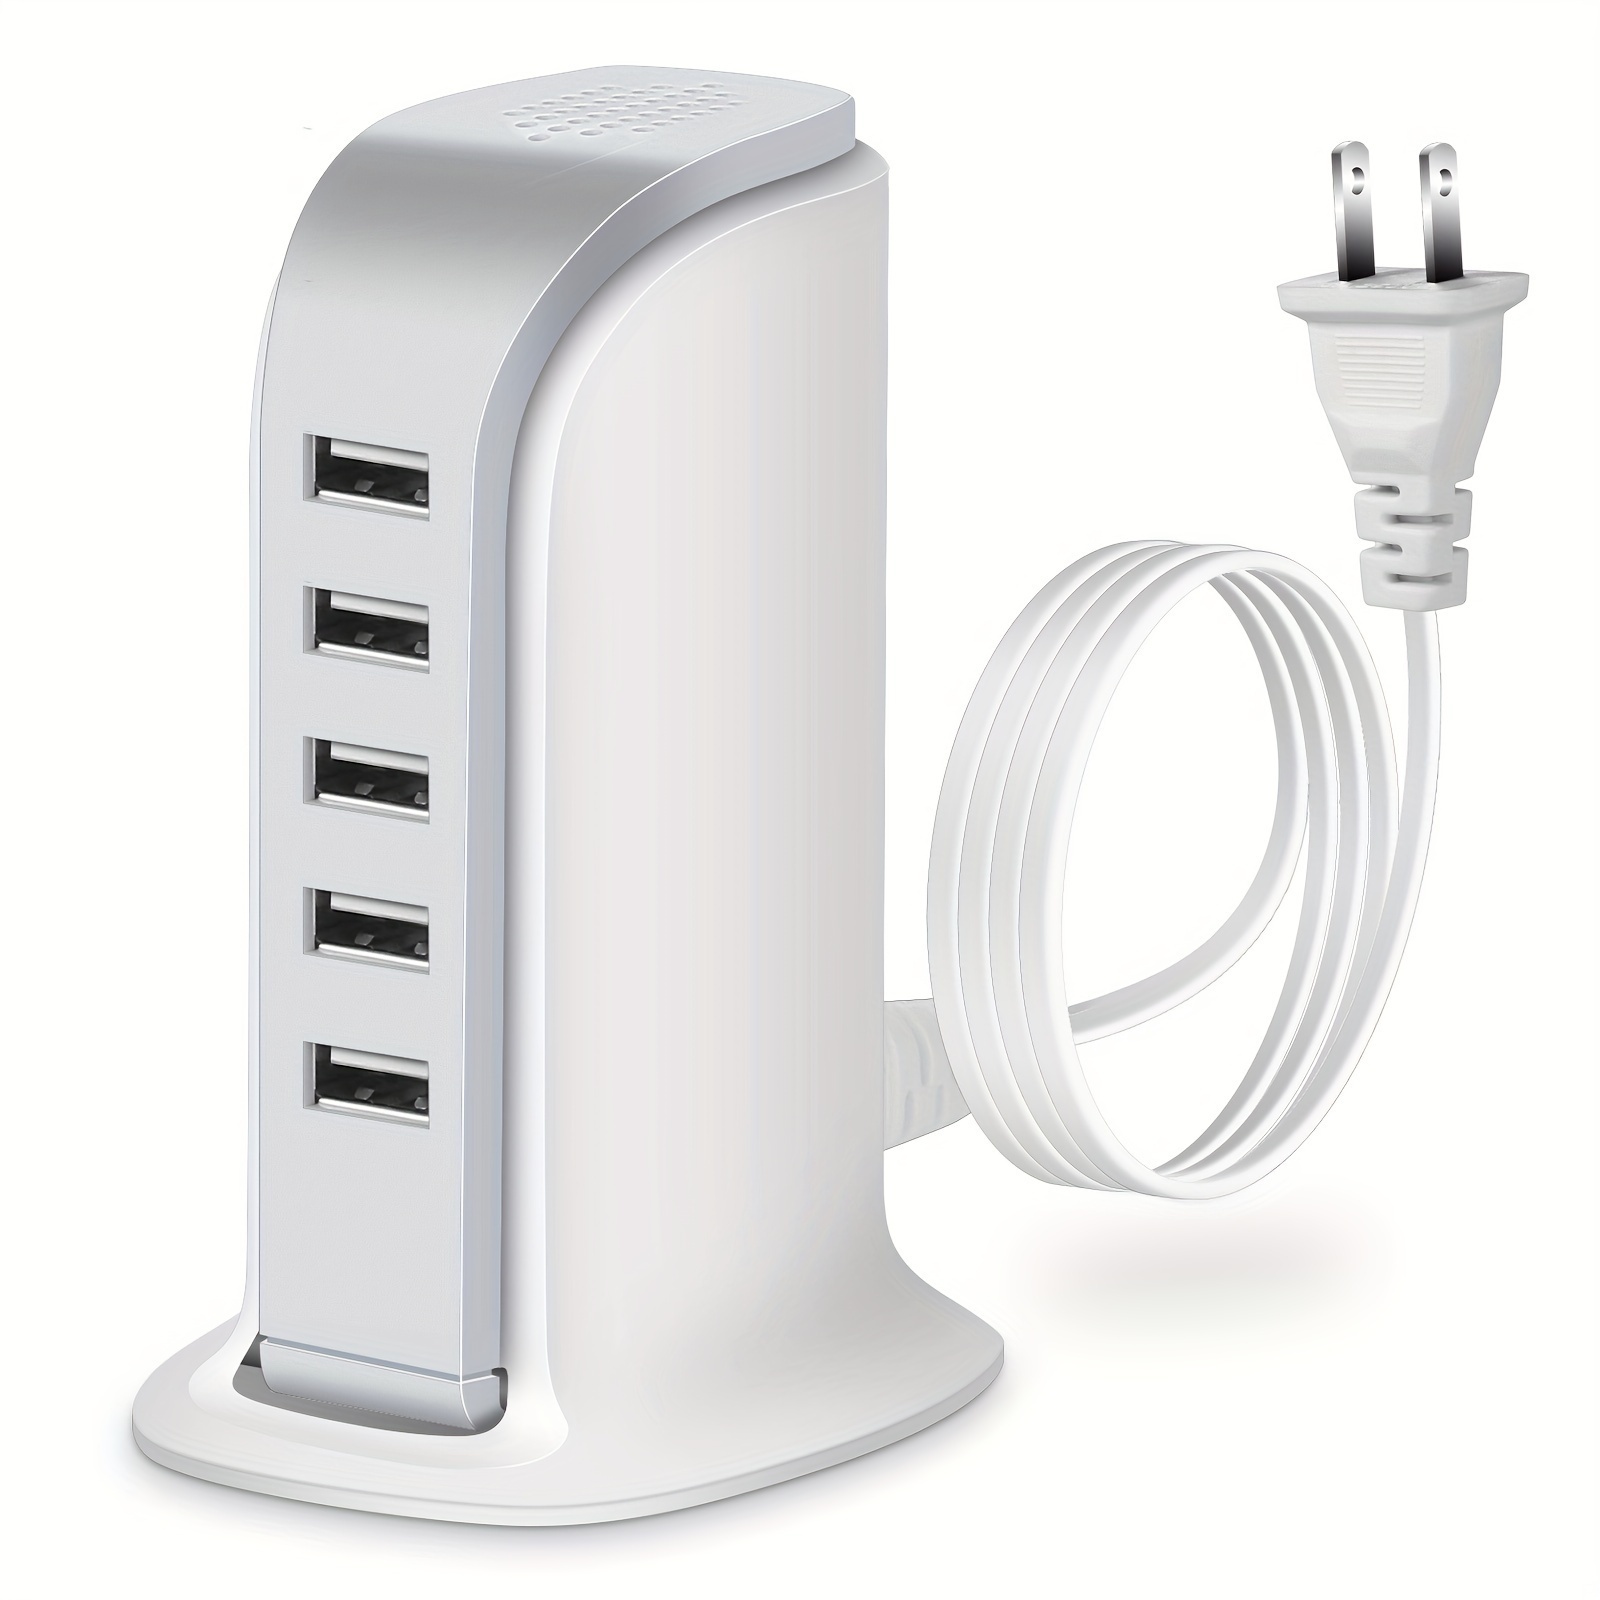 

5-port Usb Charging Station: Super-fast Charging For Iphone, Ipad, Kindle & More!